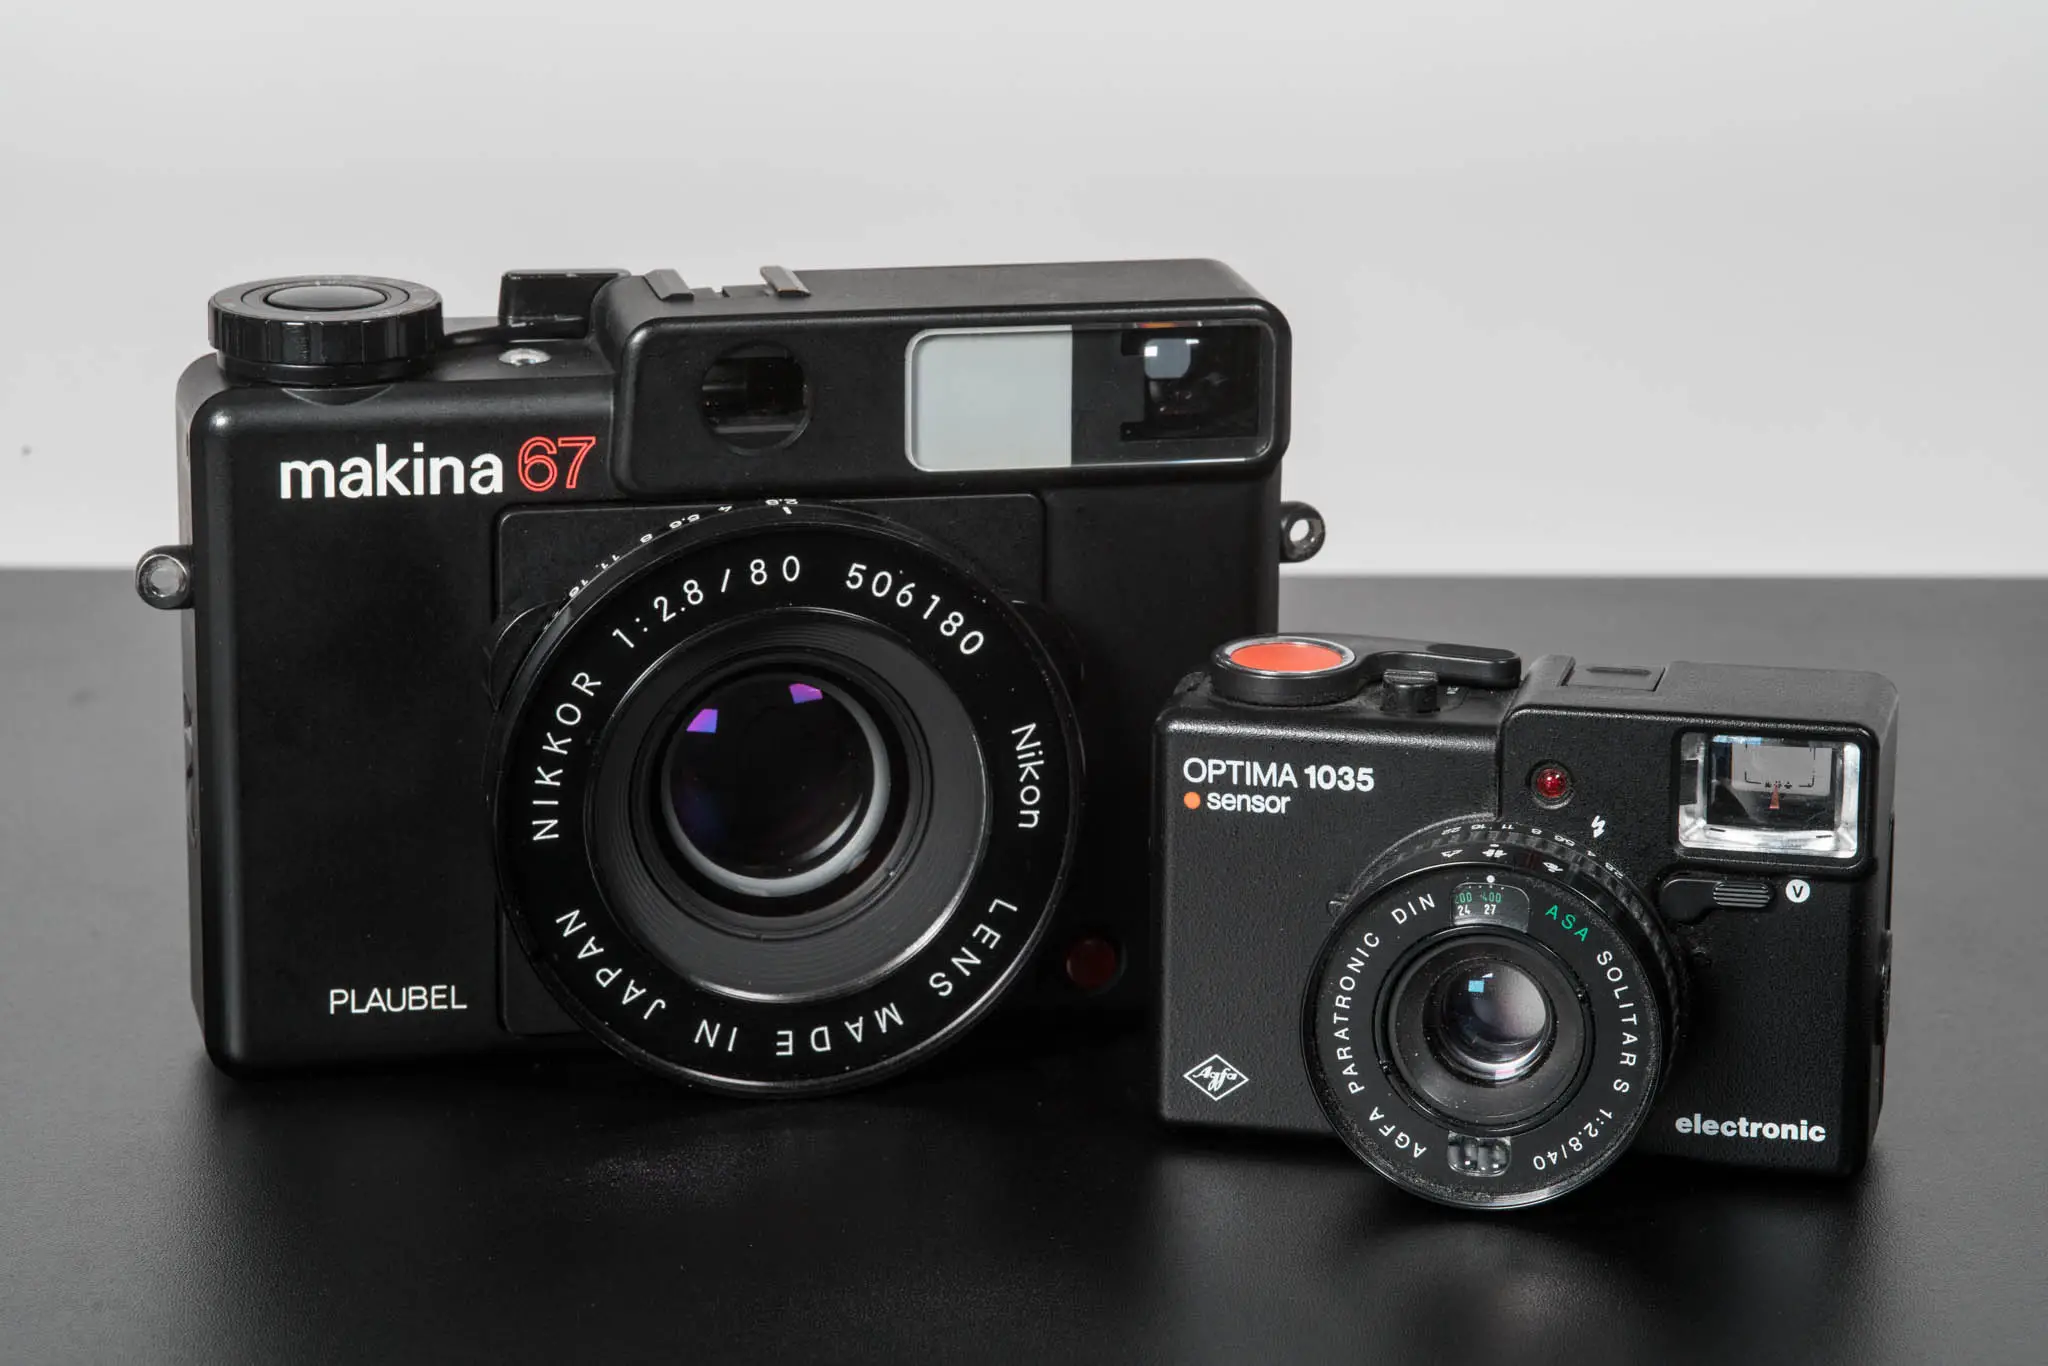 Functionalist camera design, the Agfa 1035 and the Plaubel Makina